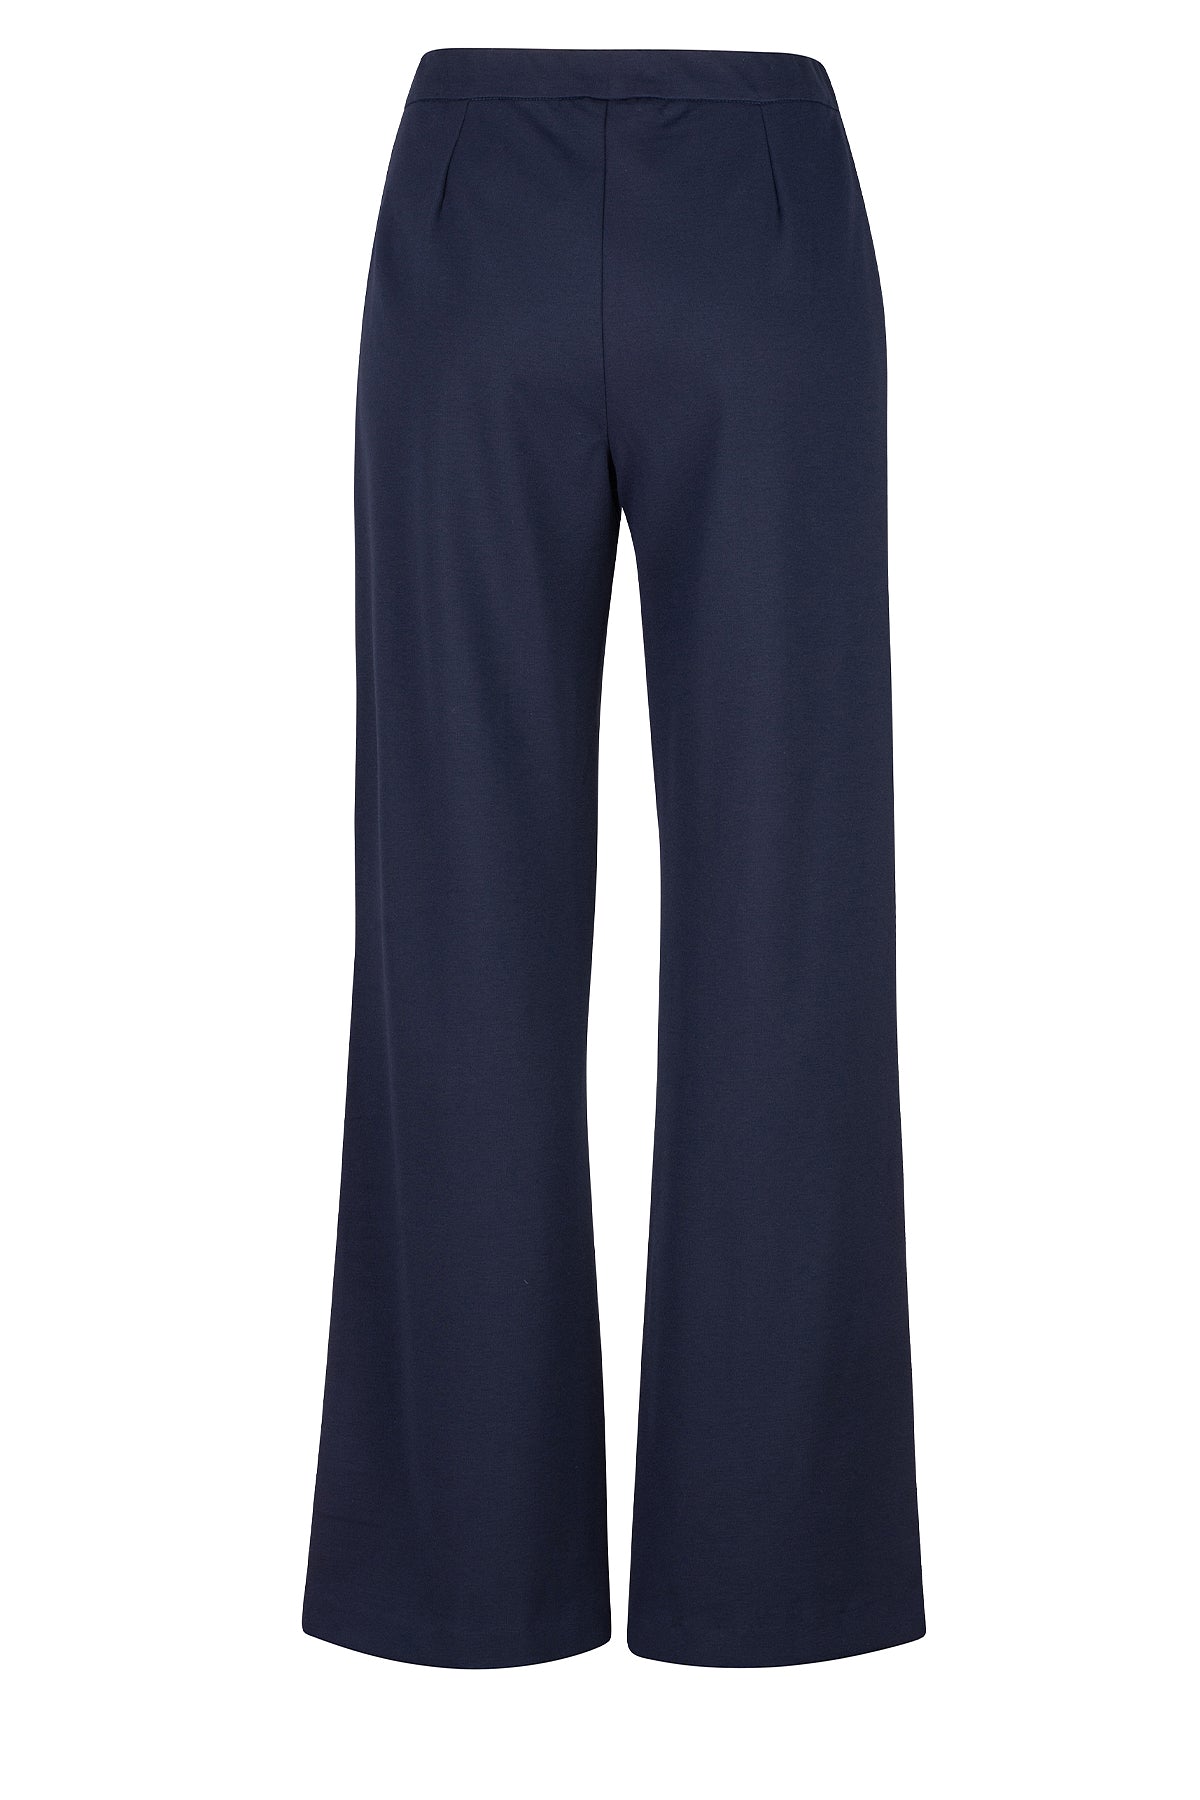 LUXZUZ // ONE TWO Beate Pant Pant 575 Navy